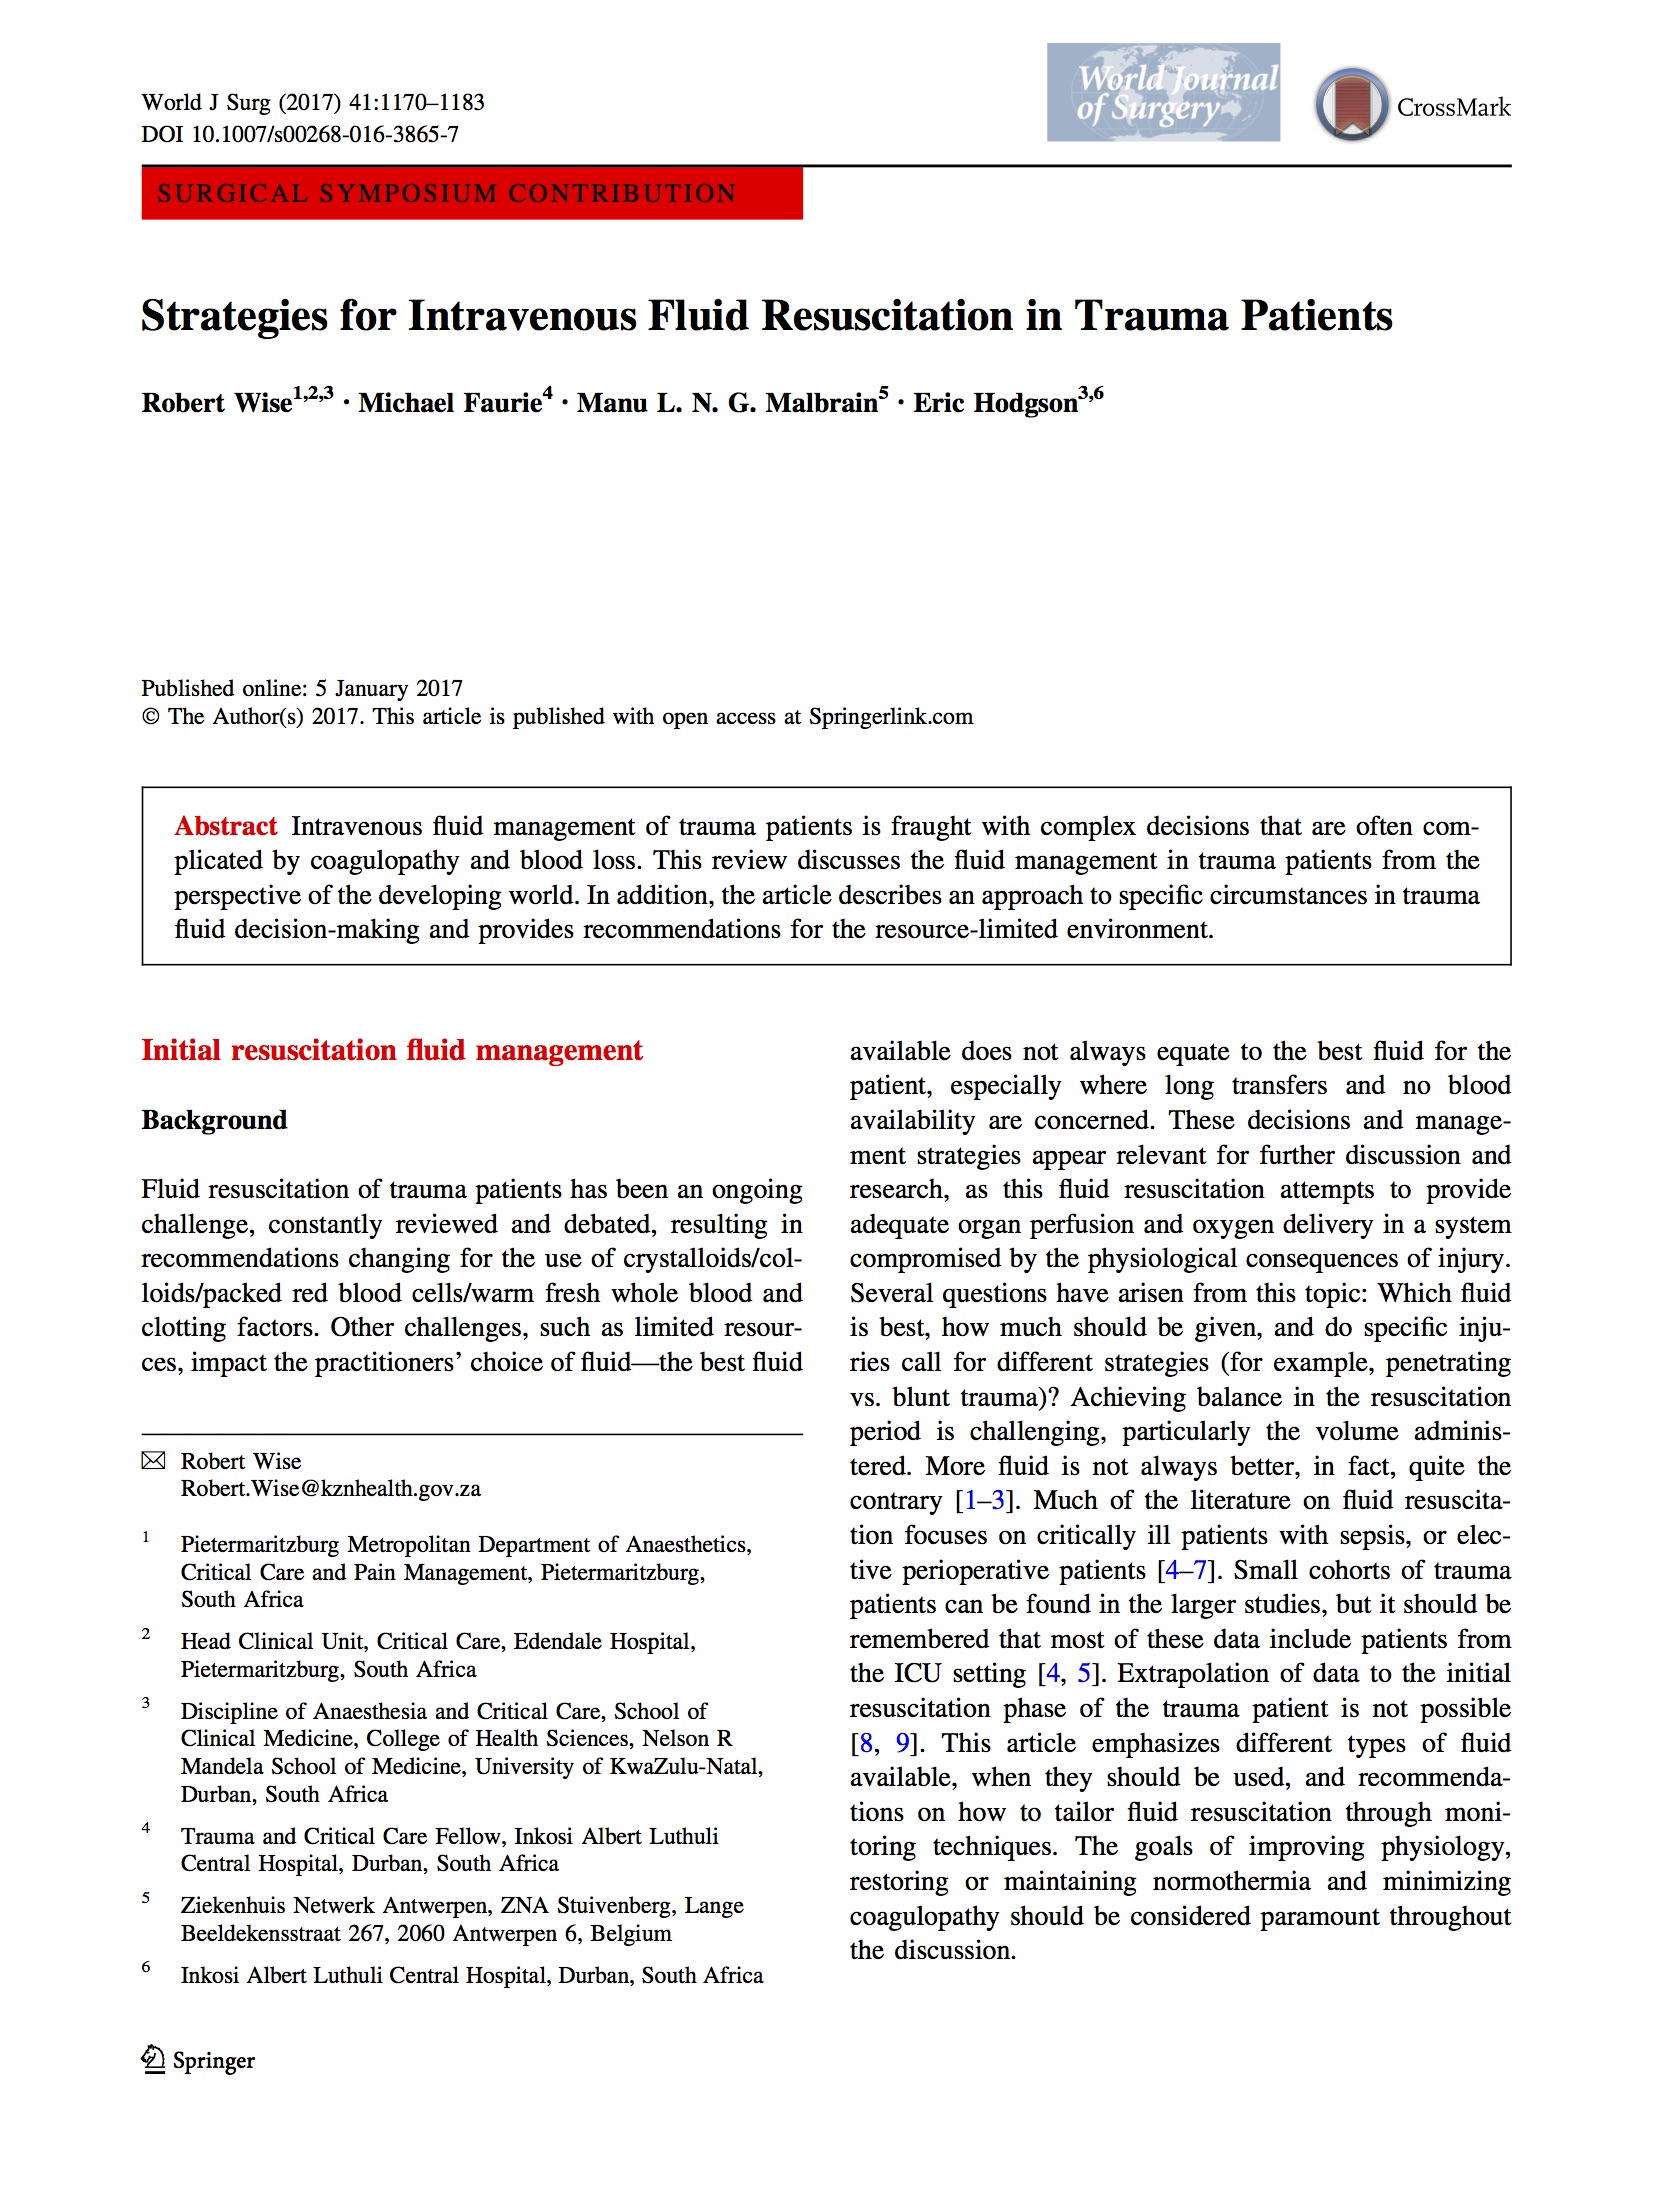 iFA research trauma cover page